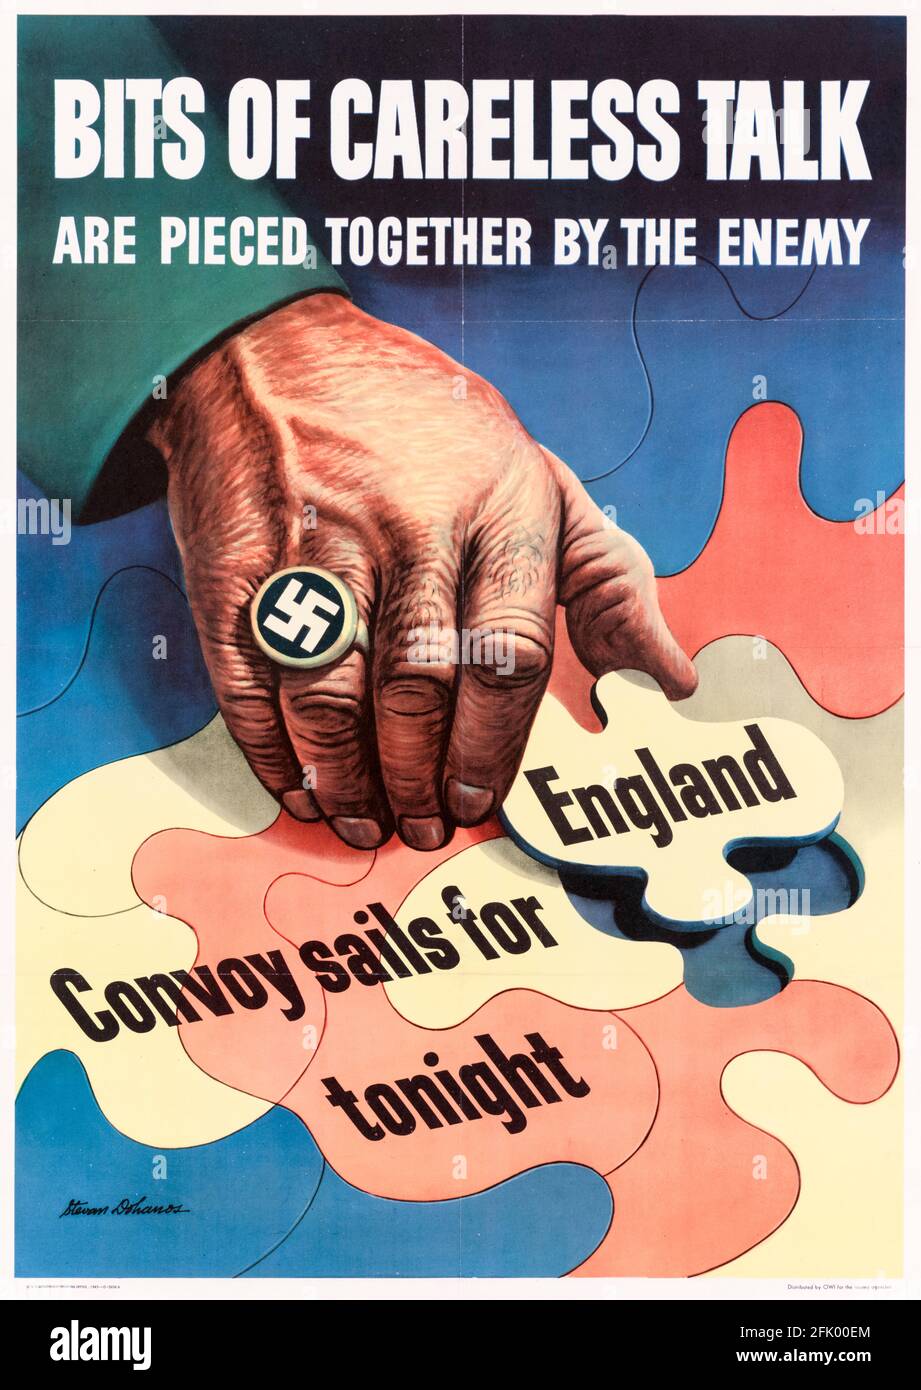 American, WW2 Public Information Poster,: Bits of Careless Talk are pieced together by the Enemy, 1942-1945 Stockfoto